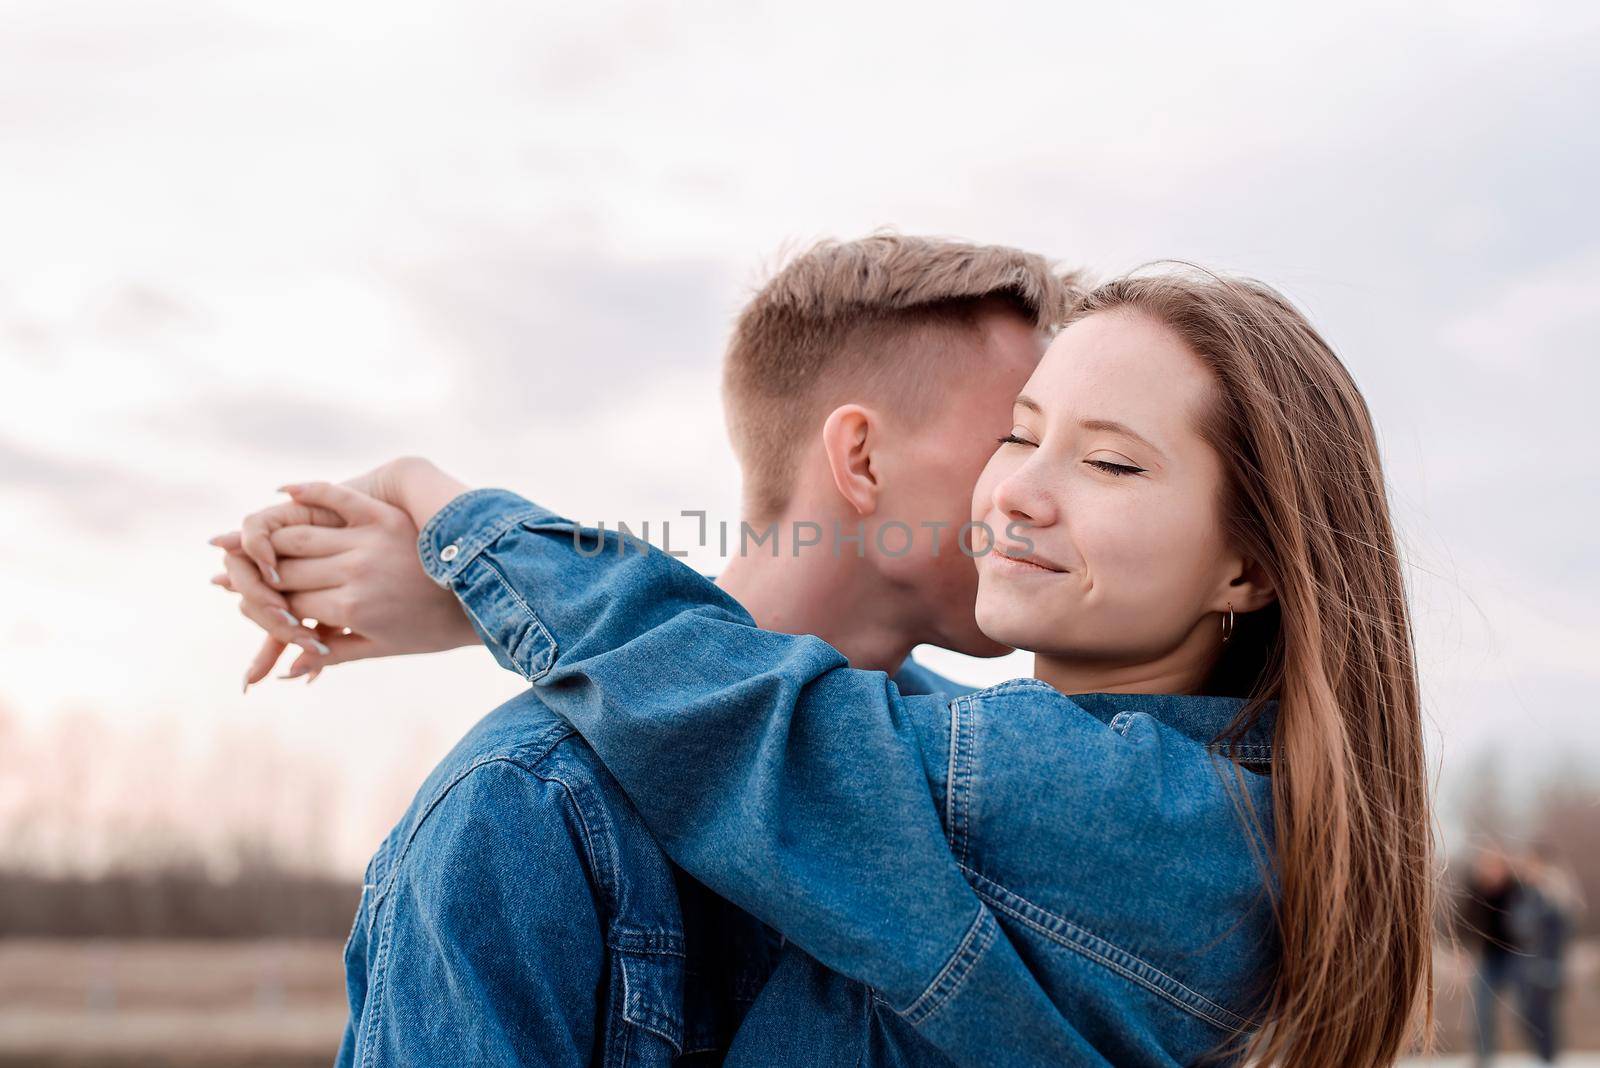 Happy young loving couple embracing each other outdoors in the park having fun